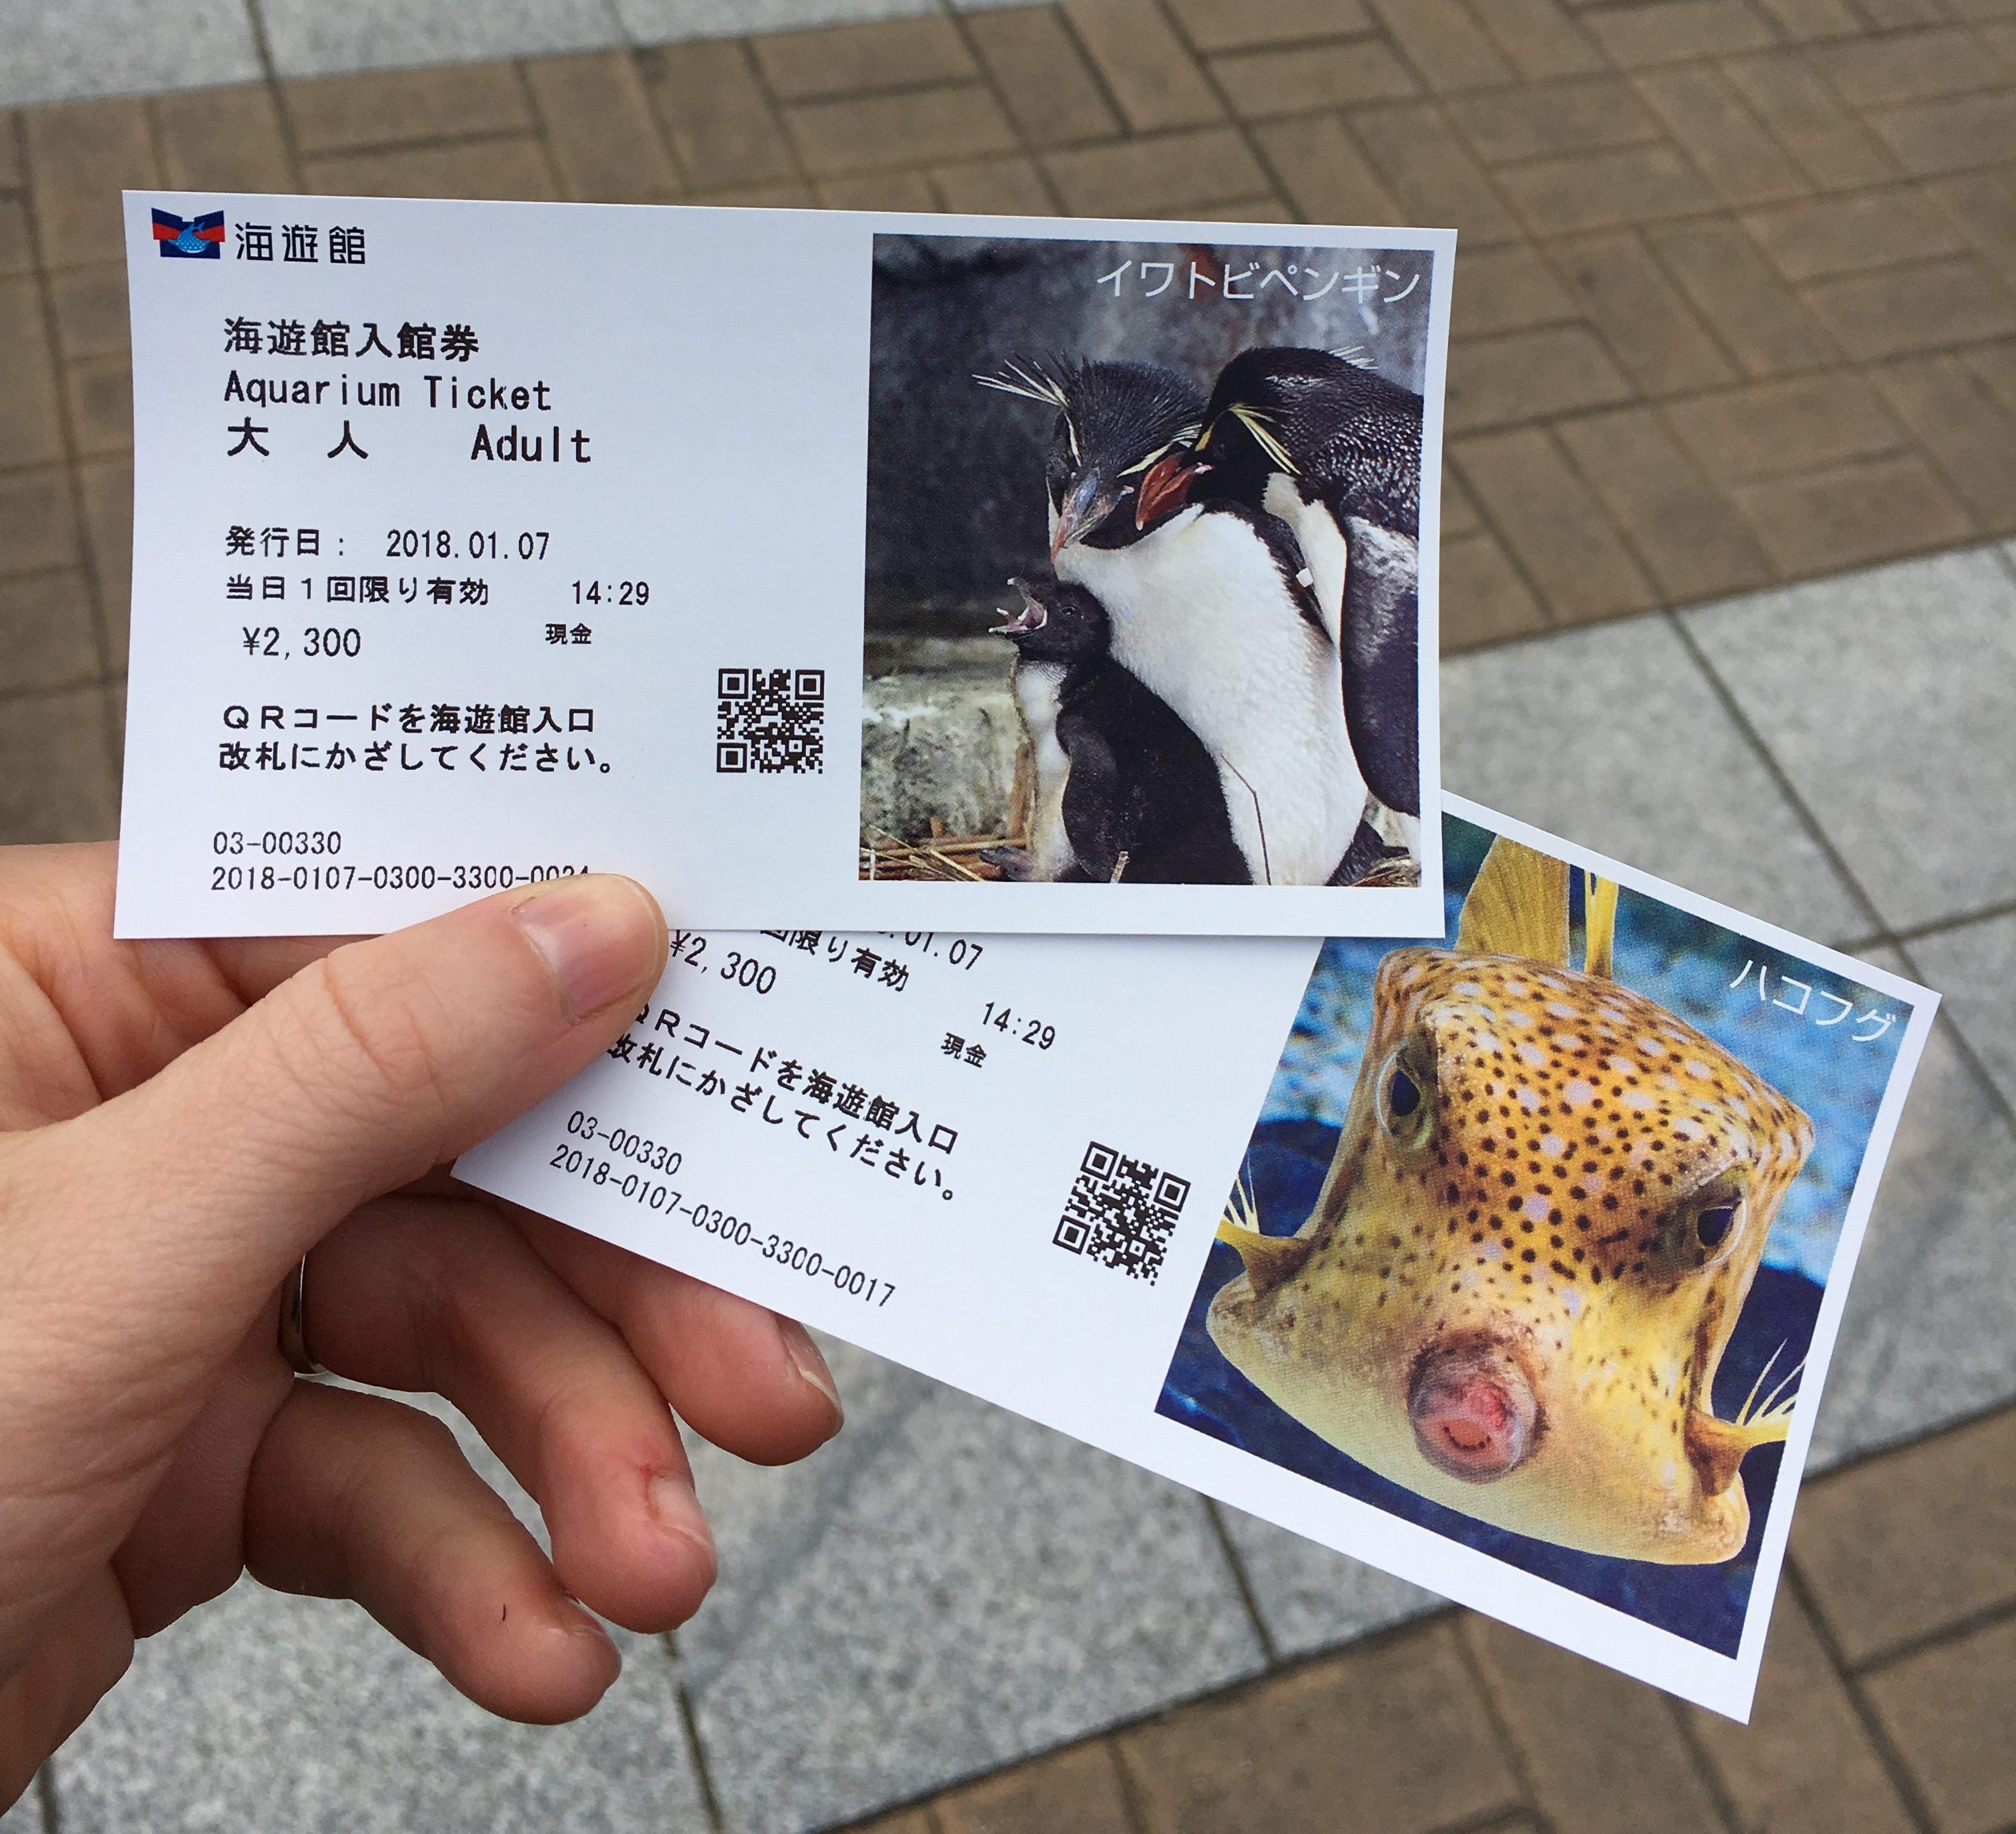 tickets for the osaka aquarium featuring pictures of a penguin and a fish